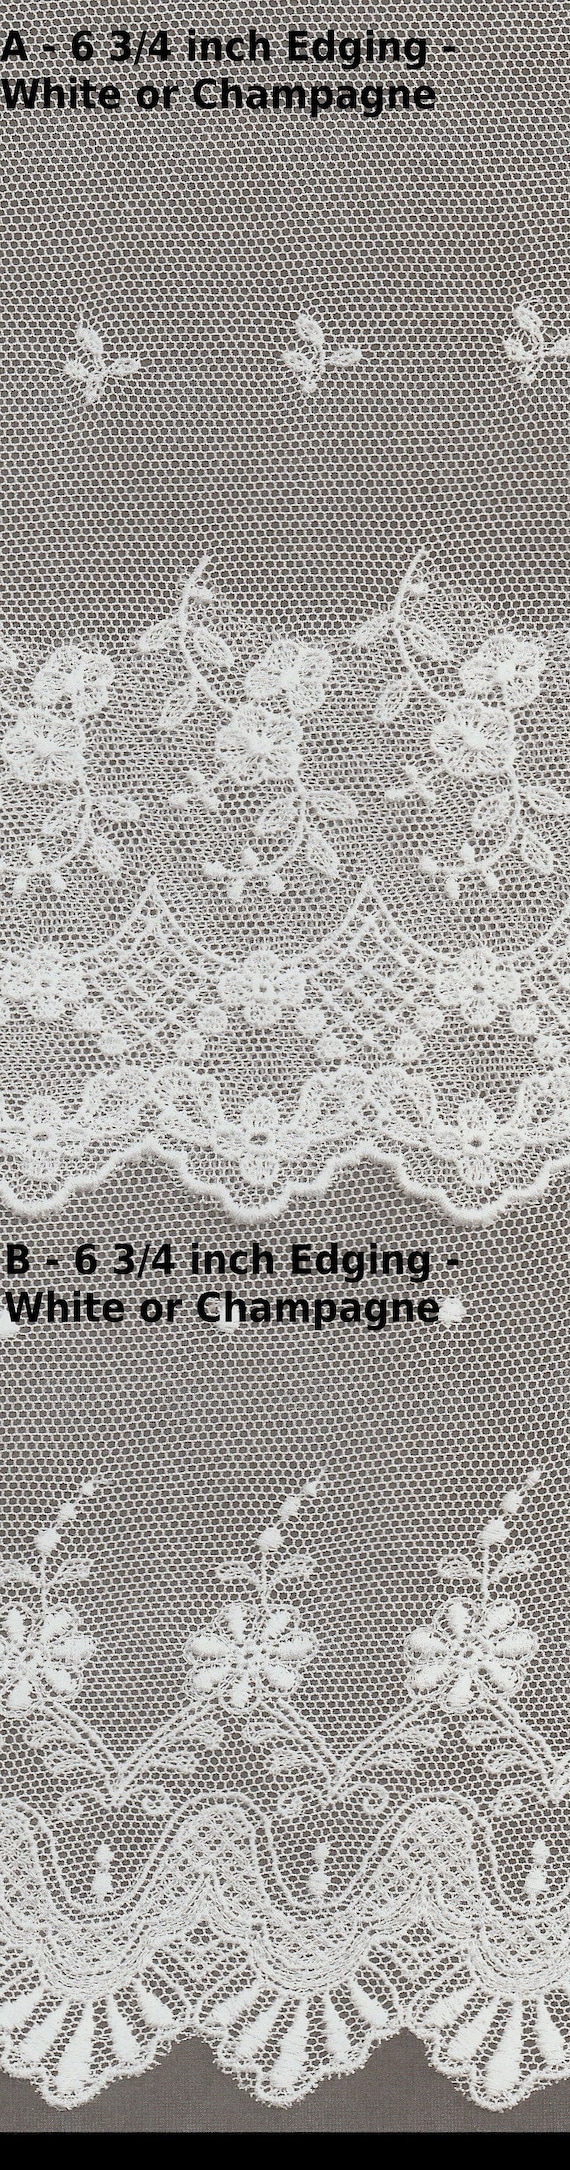 100 Percent Cotton Spanish Netting in White and Champagne Available in  White, and Champagne Wide Edging Heirloom Sewing 